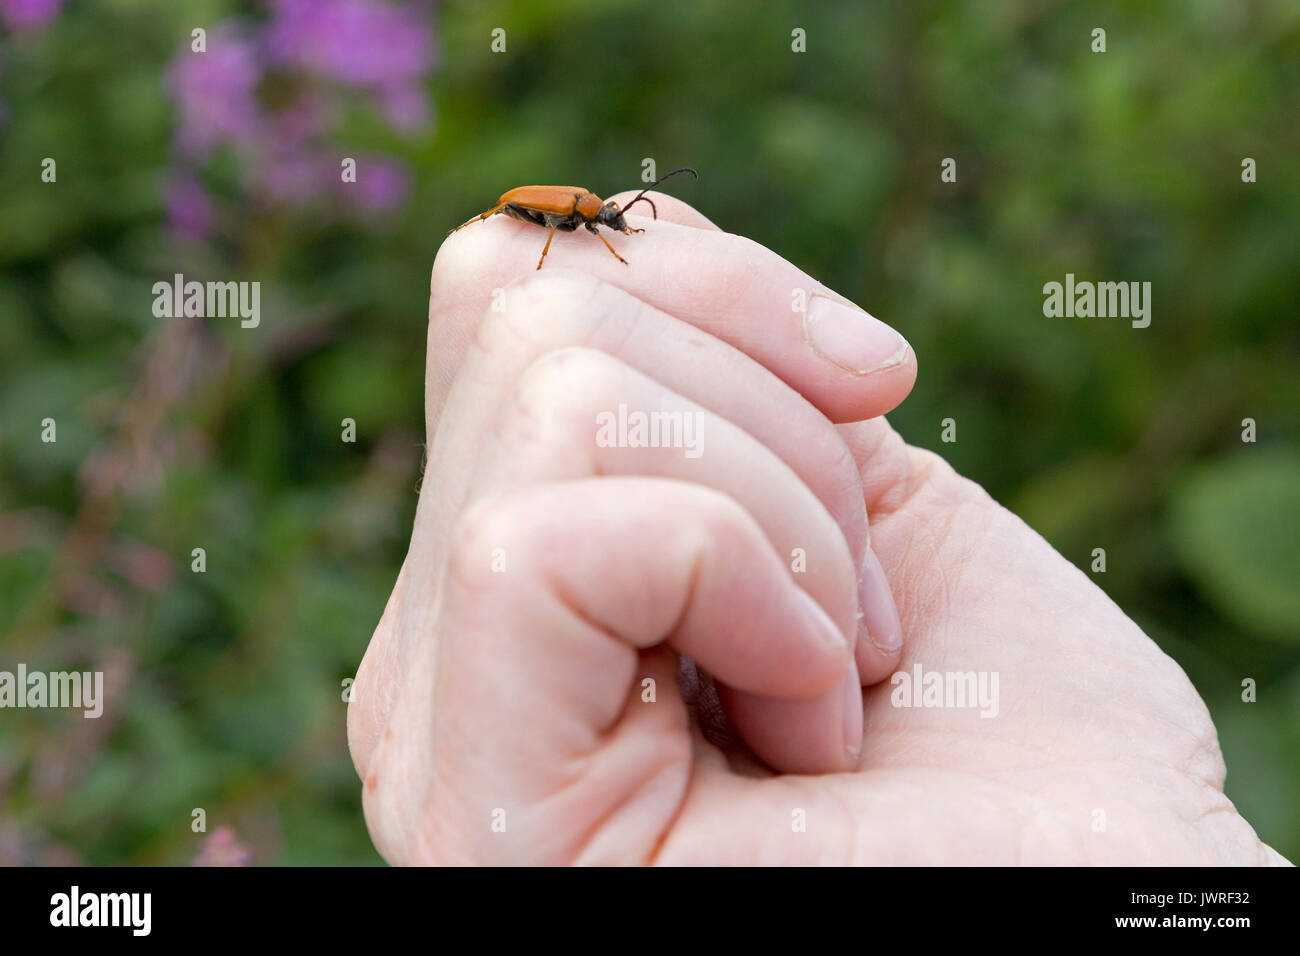 red longhorn beetle (Stictoleptura rubra) on a woman´s hand Stock Photo